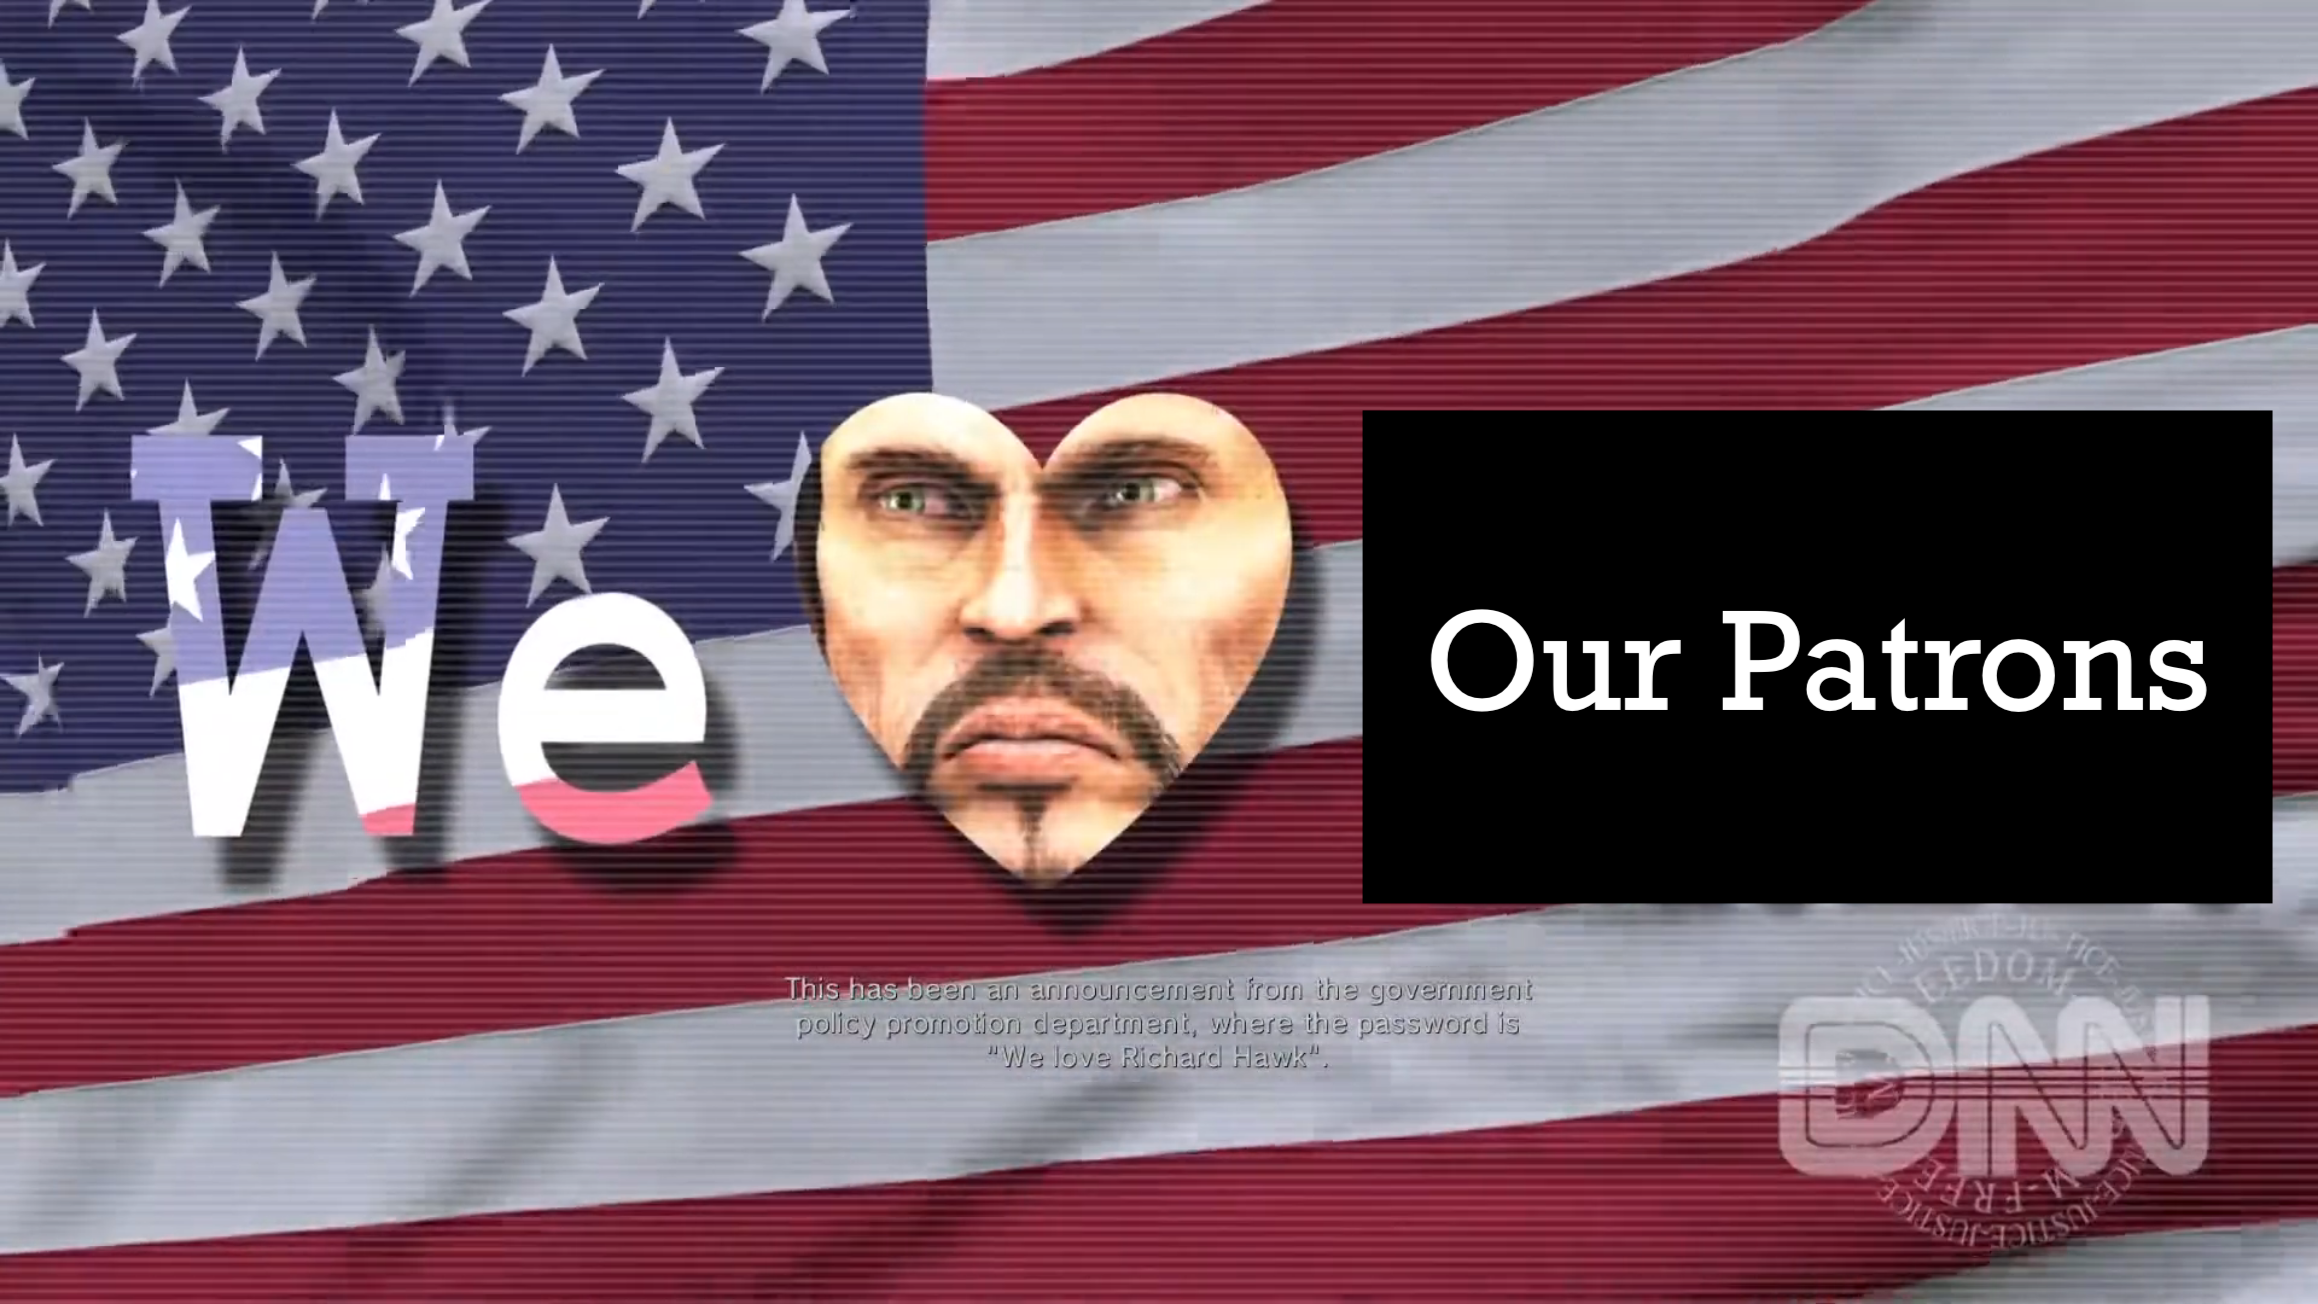 We Heart Our Patrons, photoshopped on top of a screenshot from Metal Wolf Chaos.